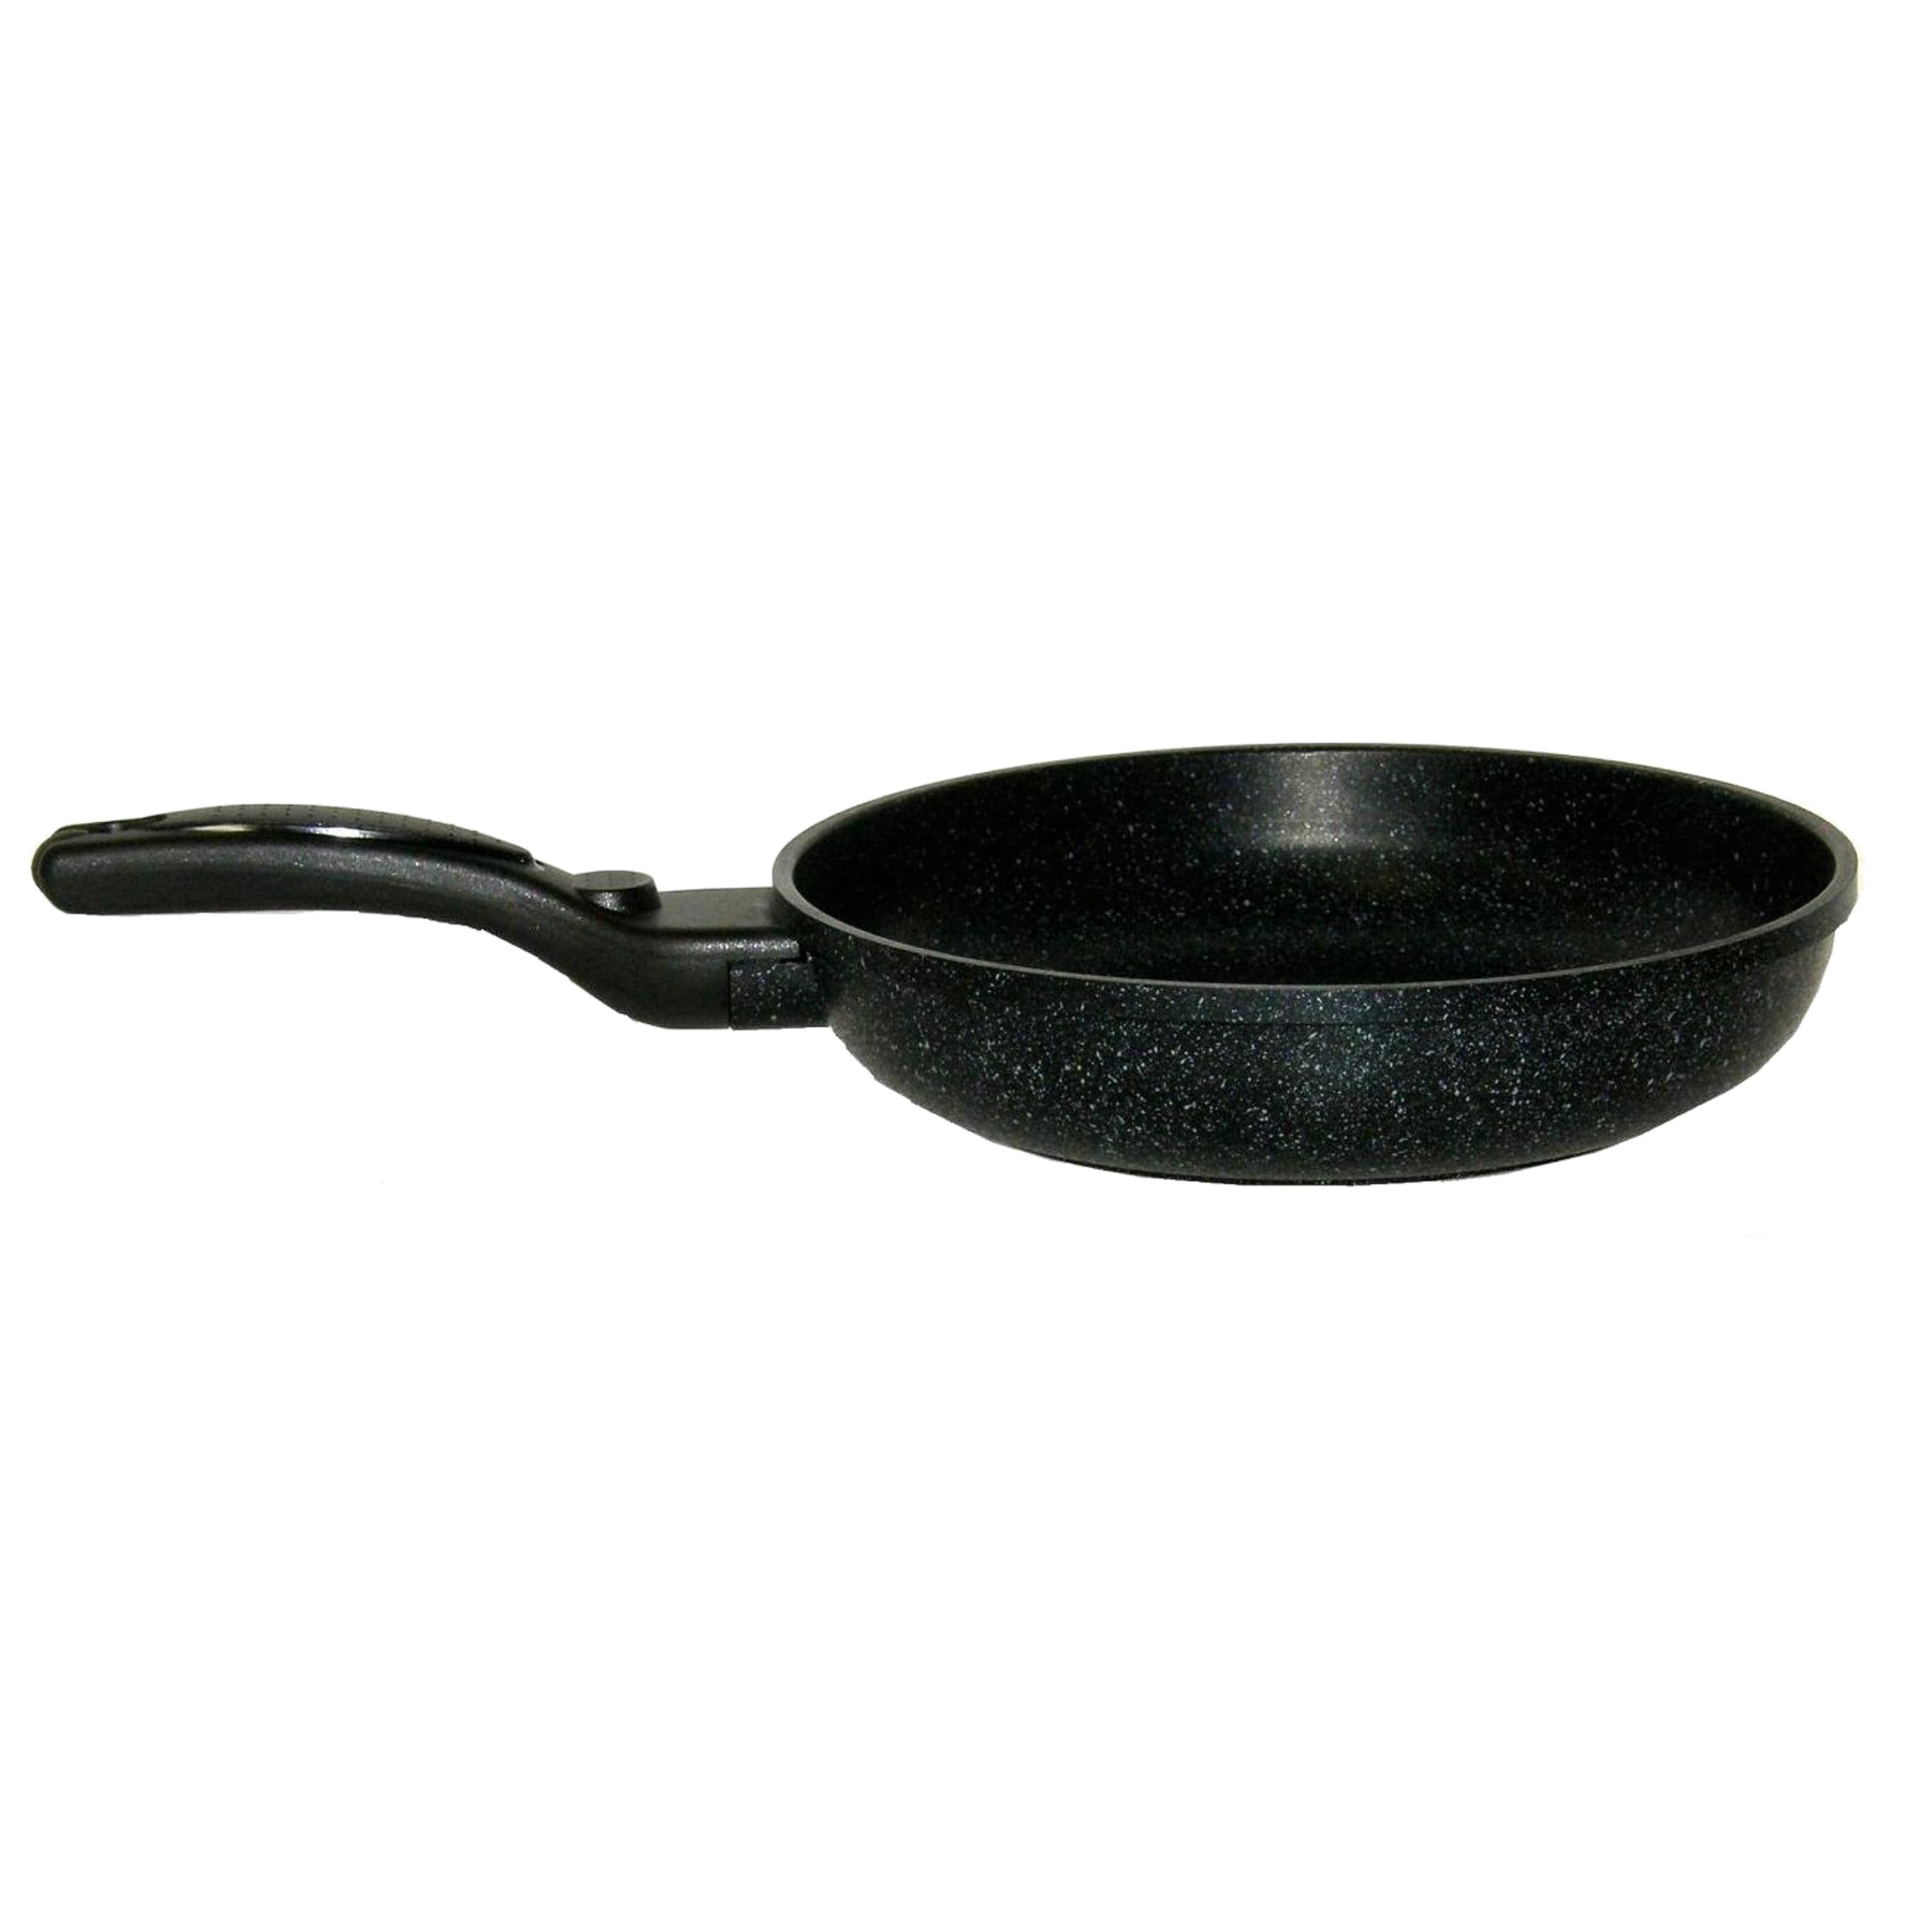 Cook N Home Ultra Granite Nonstick Skillet Fry 9.5 Inches Black/White